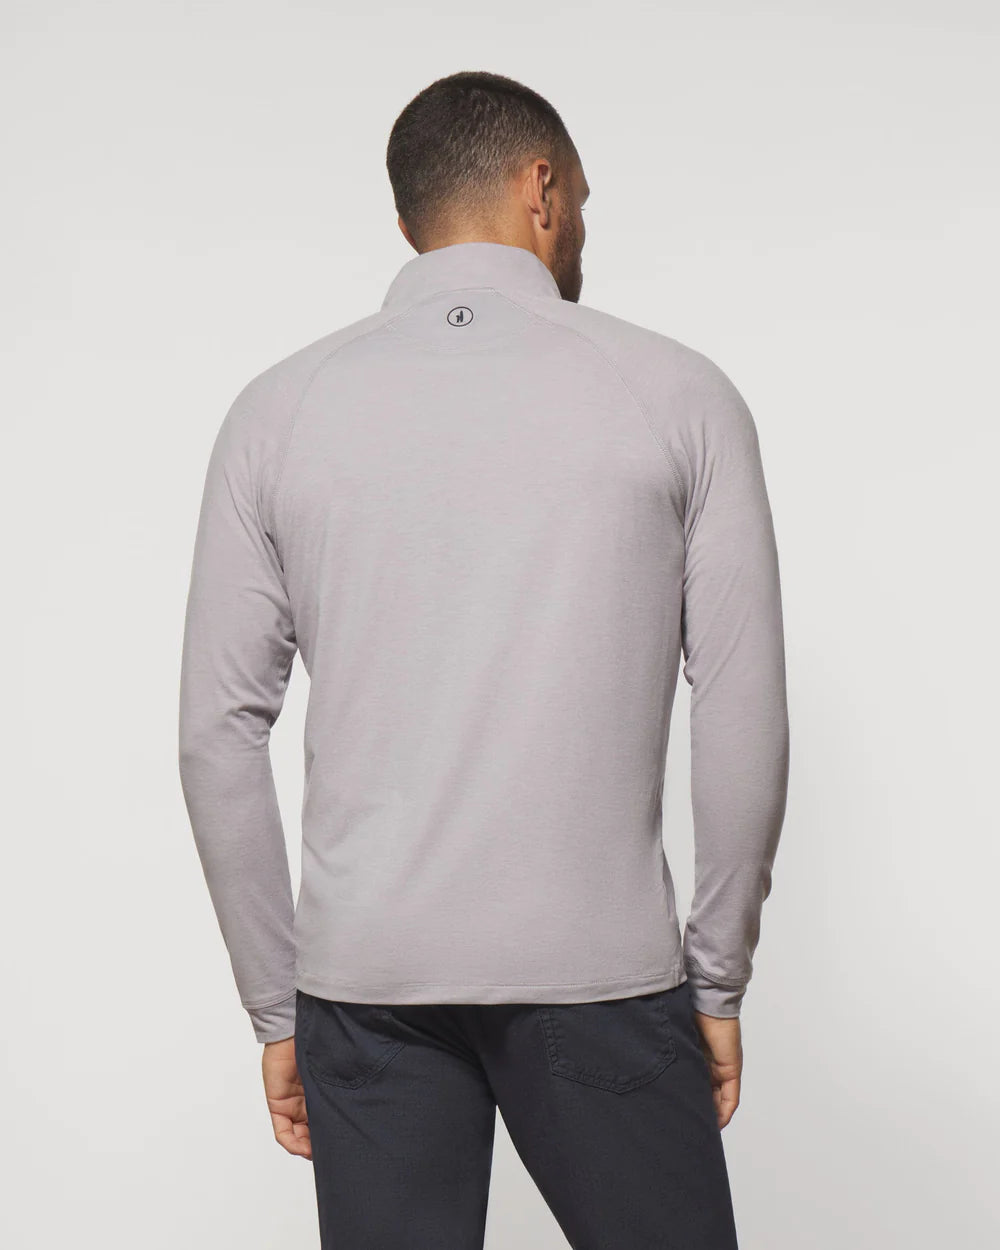 The Freeborne Performance 1/4 Zip Pullover has a contrasting reverse coverstitch, signature puller, lightweight zipper, raised silicone surfer dude logo, and a baseball style bottom hem, the Freeborne is the perfect elevated take on a classic silhouette. Lightweight, moisture wicking, UPF 50, and buttery soft, the Freeborne is sure to be your favourite year-round layering piece.